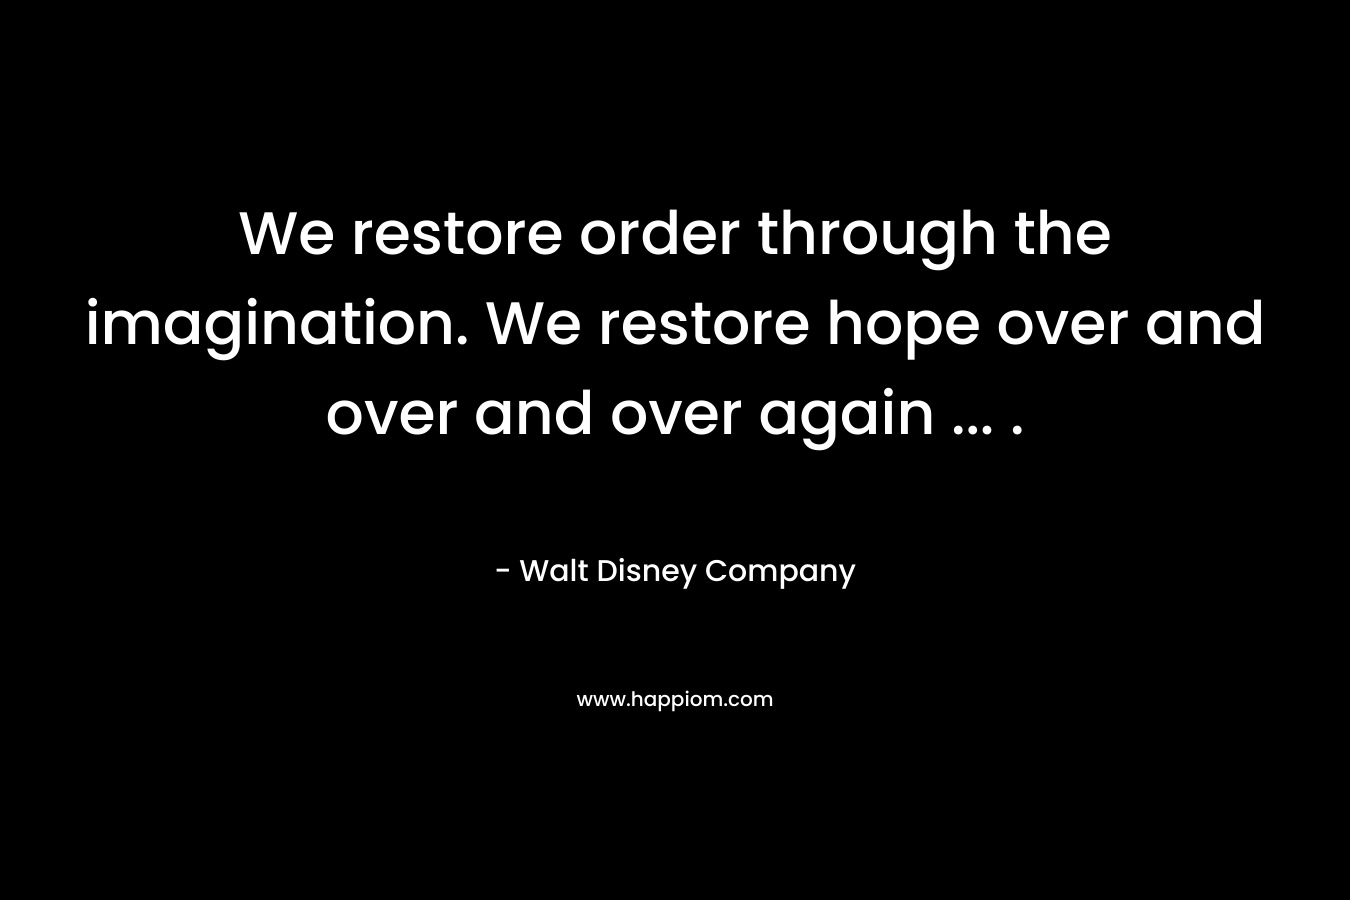 We restore order through the imagination. We restore hope over and over and over again ... .